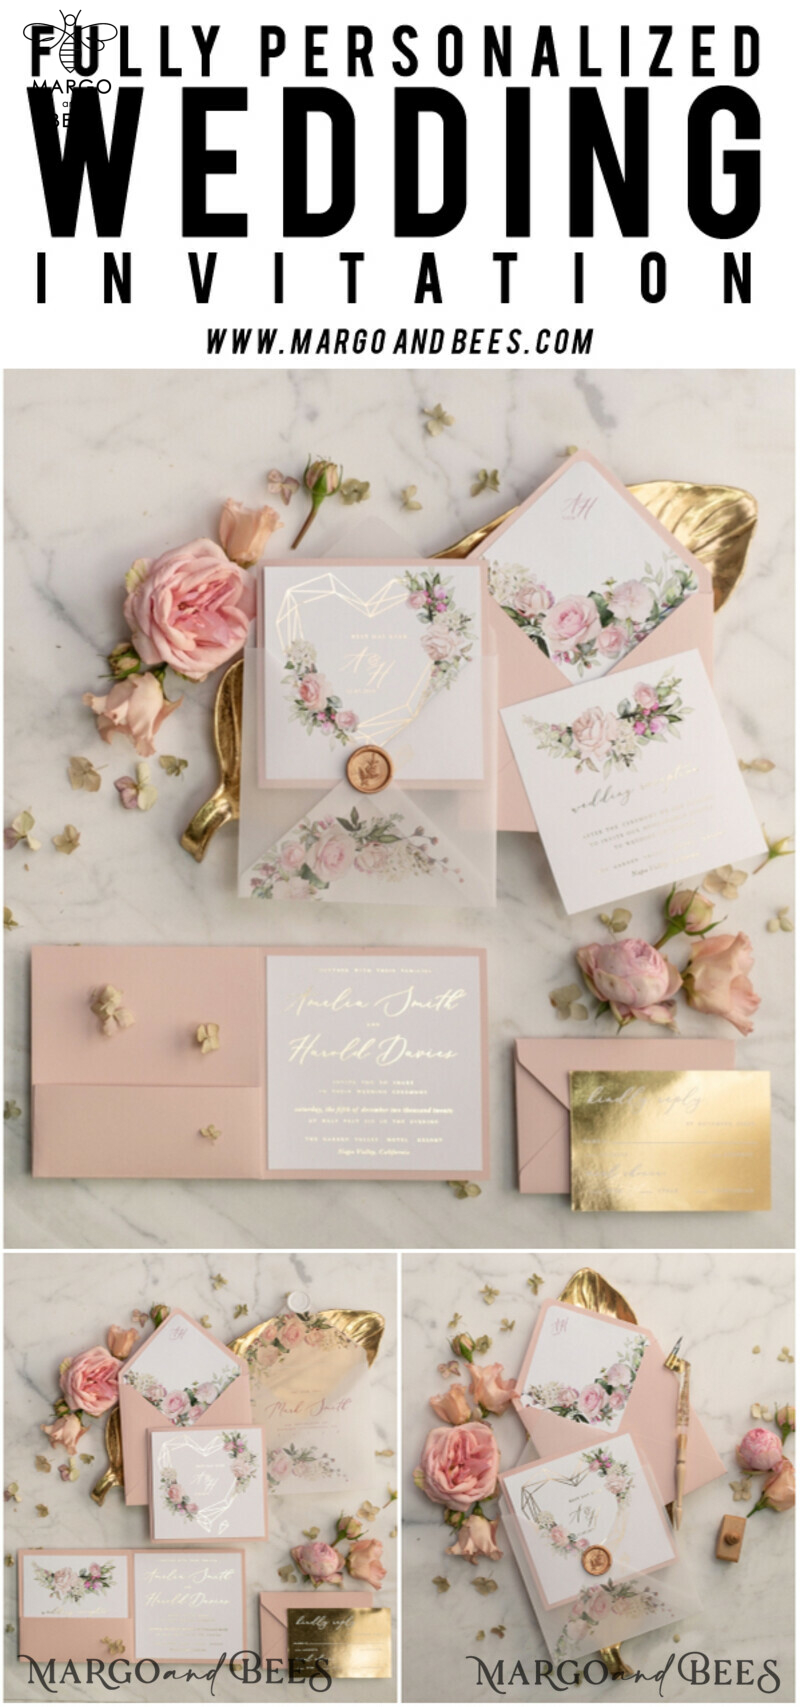 Glamorous Gold Foil Wedding Invitations with a Luxury Golden Shine: Introducing our Elegant Blush Pink Wedding Cards in a Bespoke Floral Invitation Suite-16